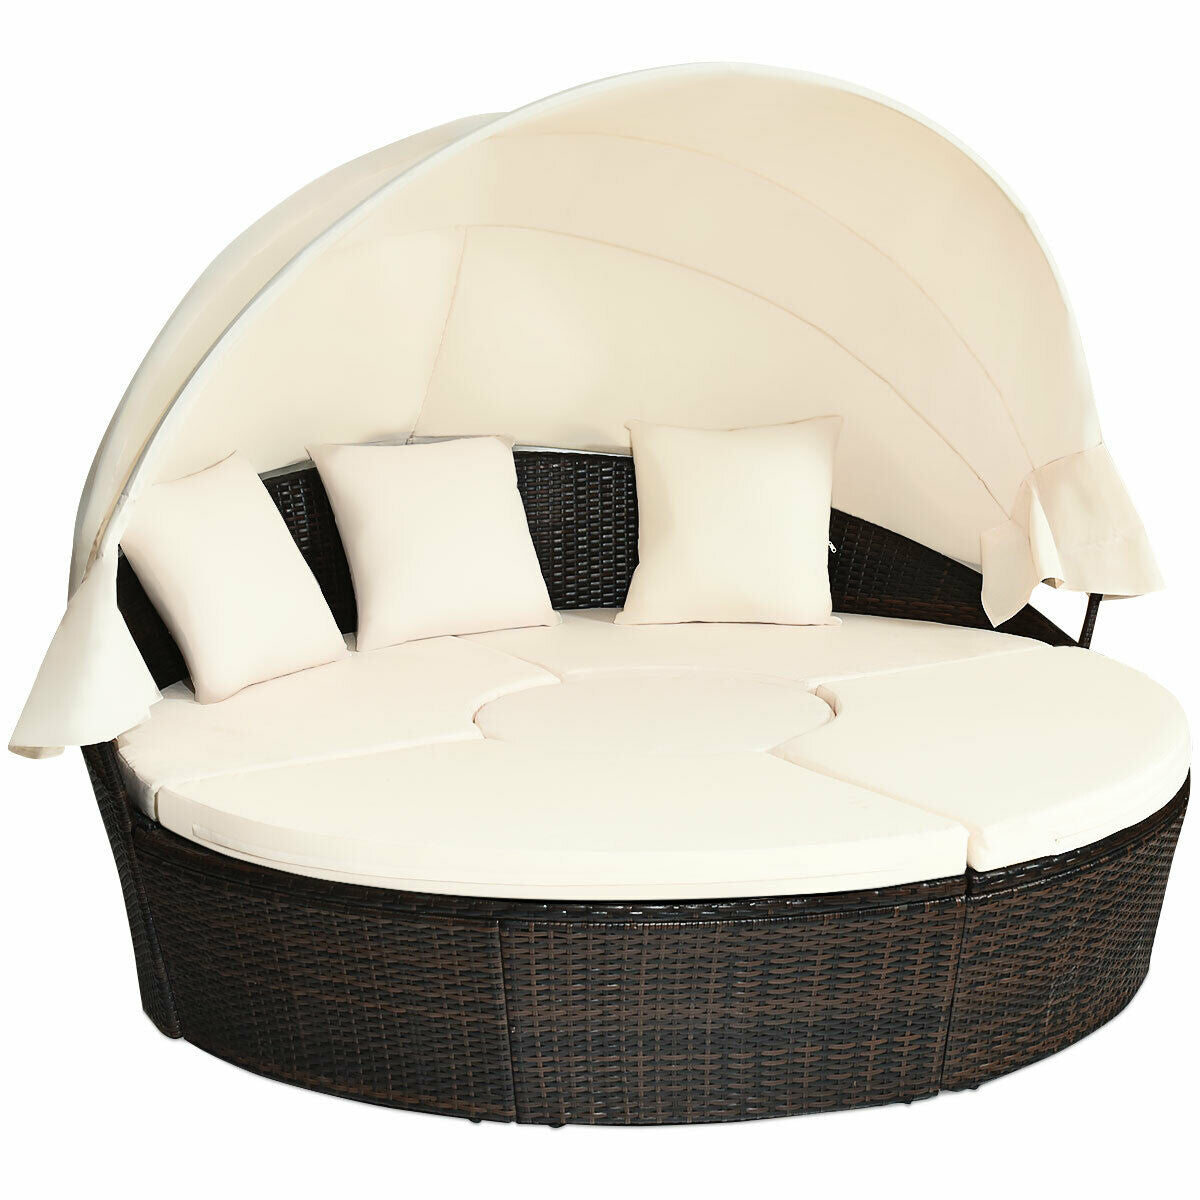 Patio Round Daybed Rattan Furniture Sets With Canopy ...